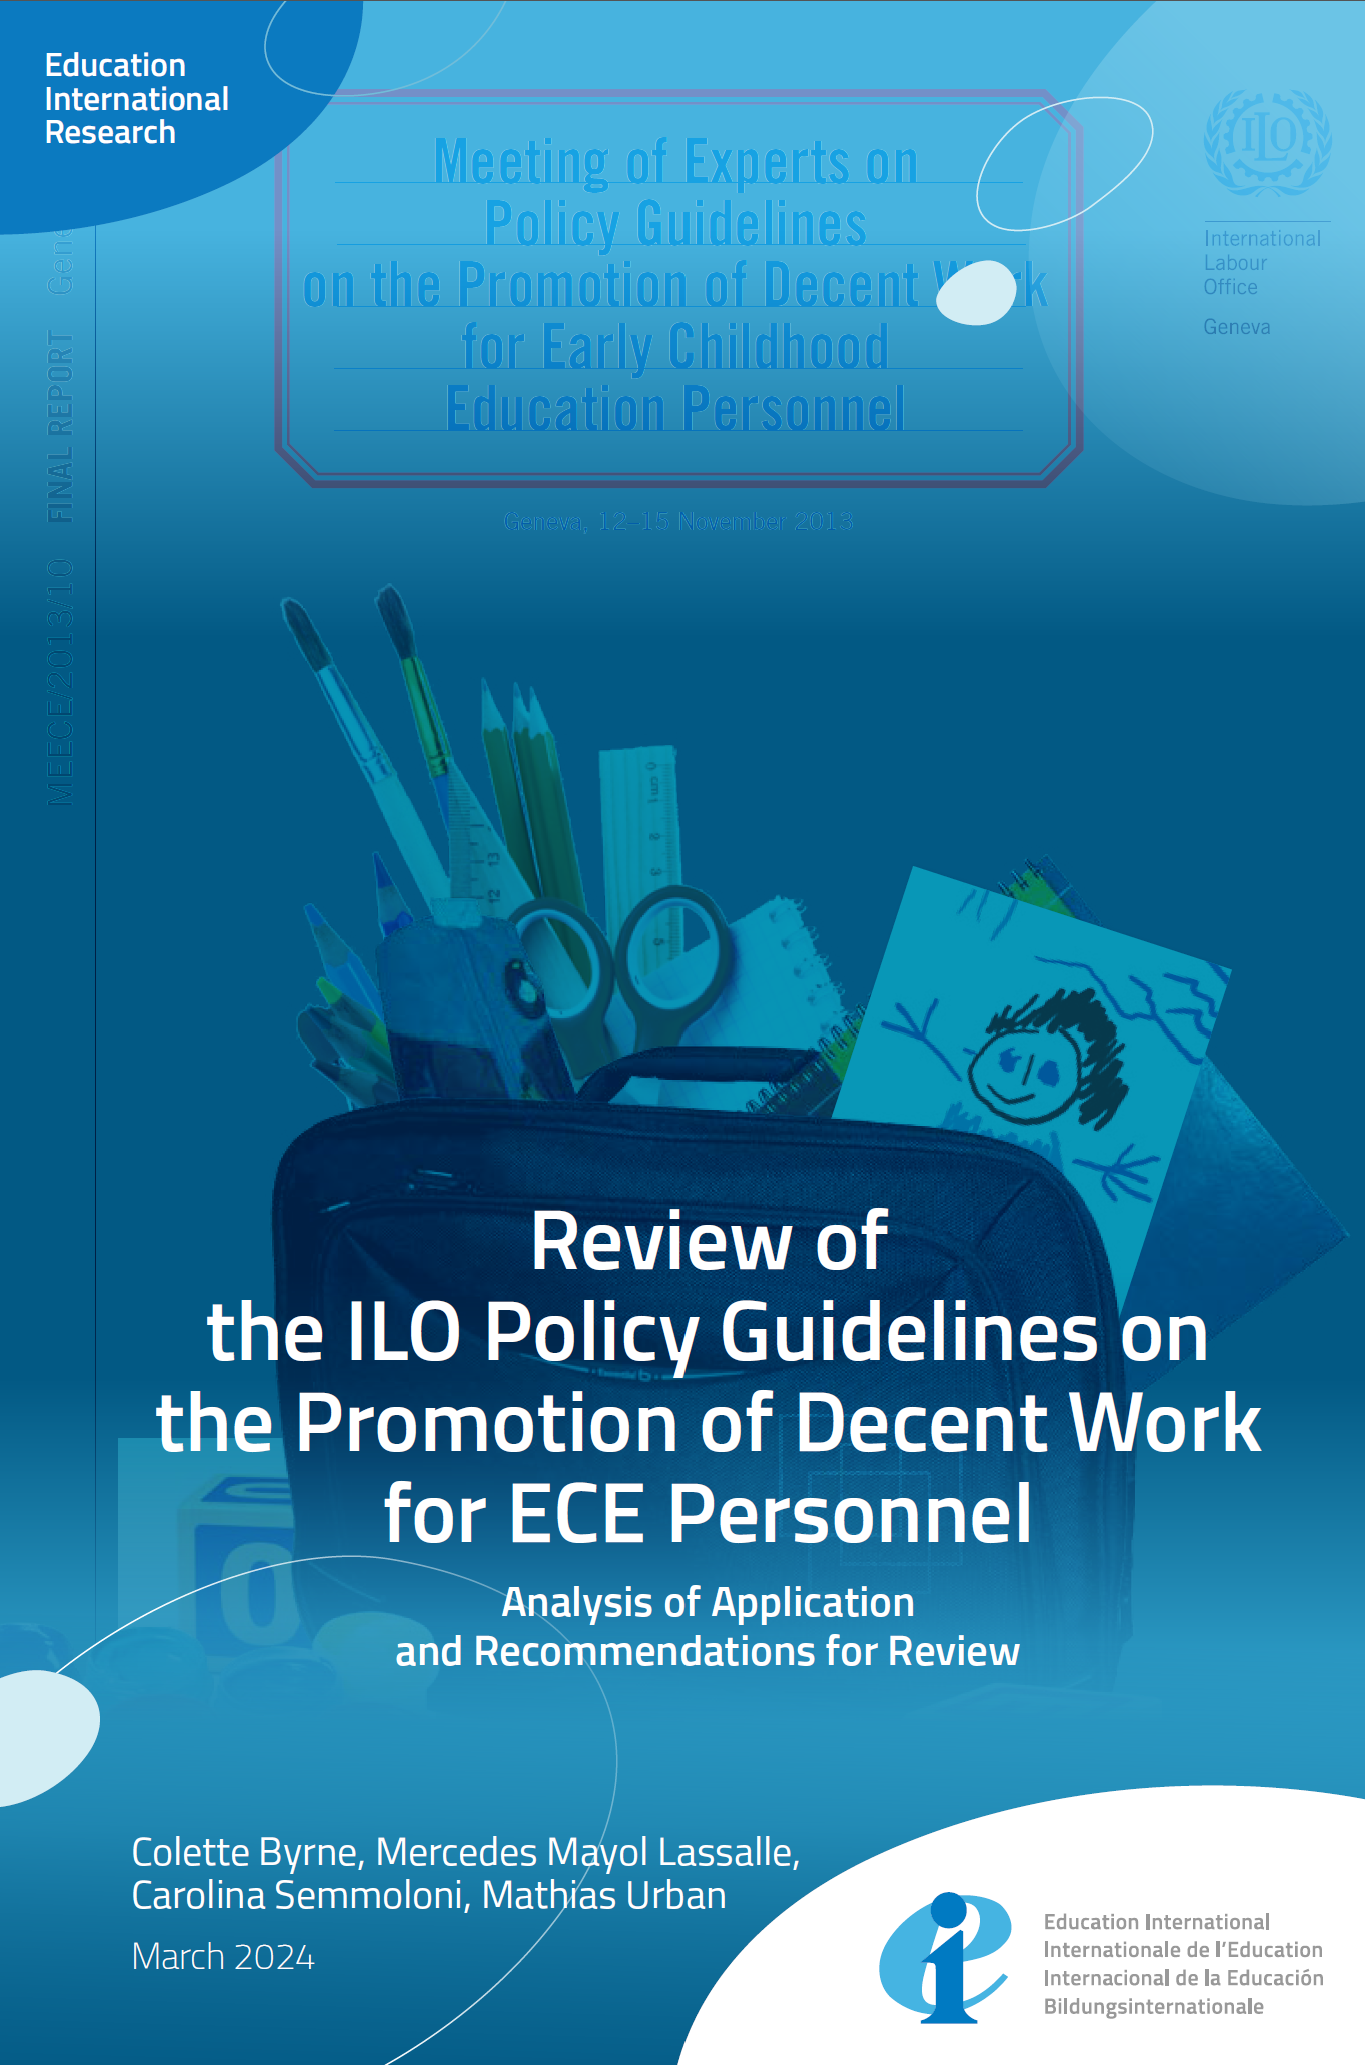 Review of the ILO Policy Guidelines on the Promotion of Decent Work for ECE Personnel